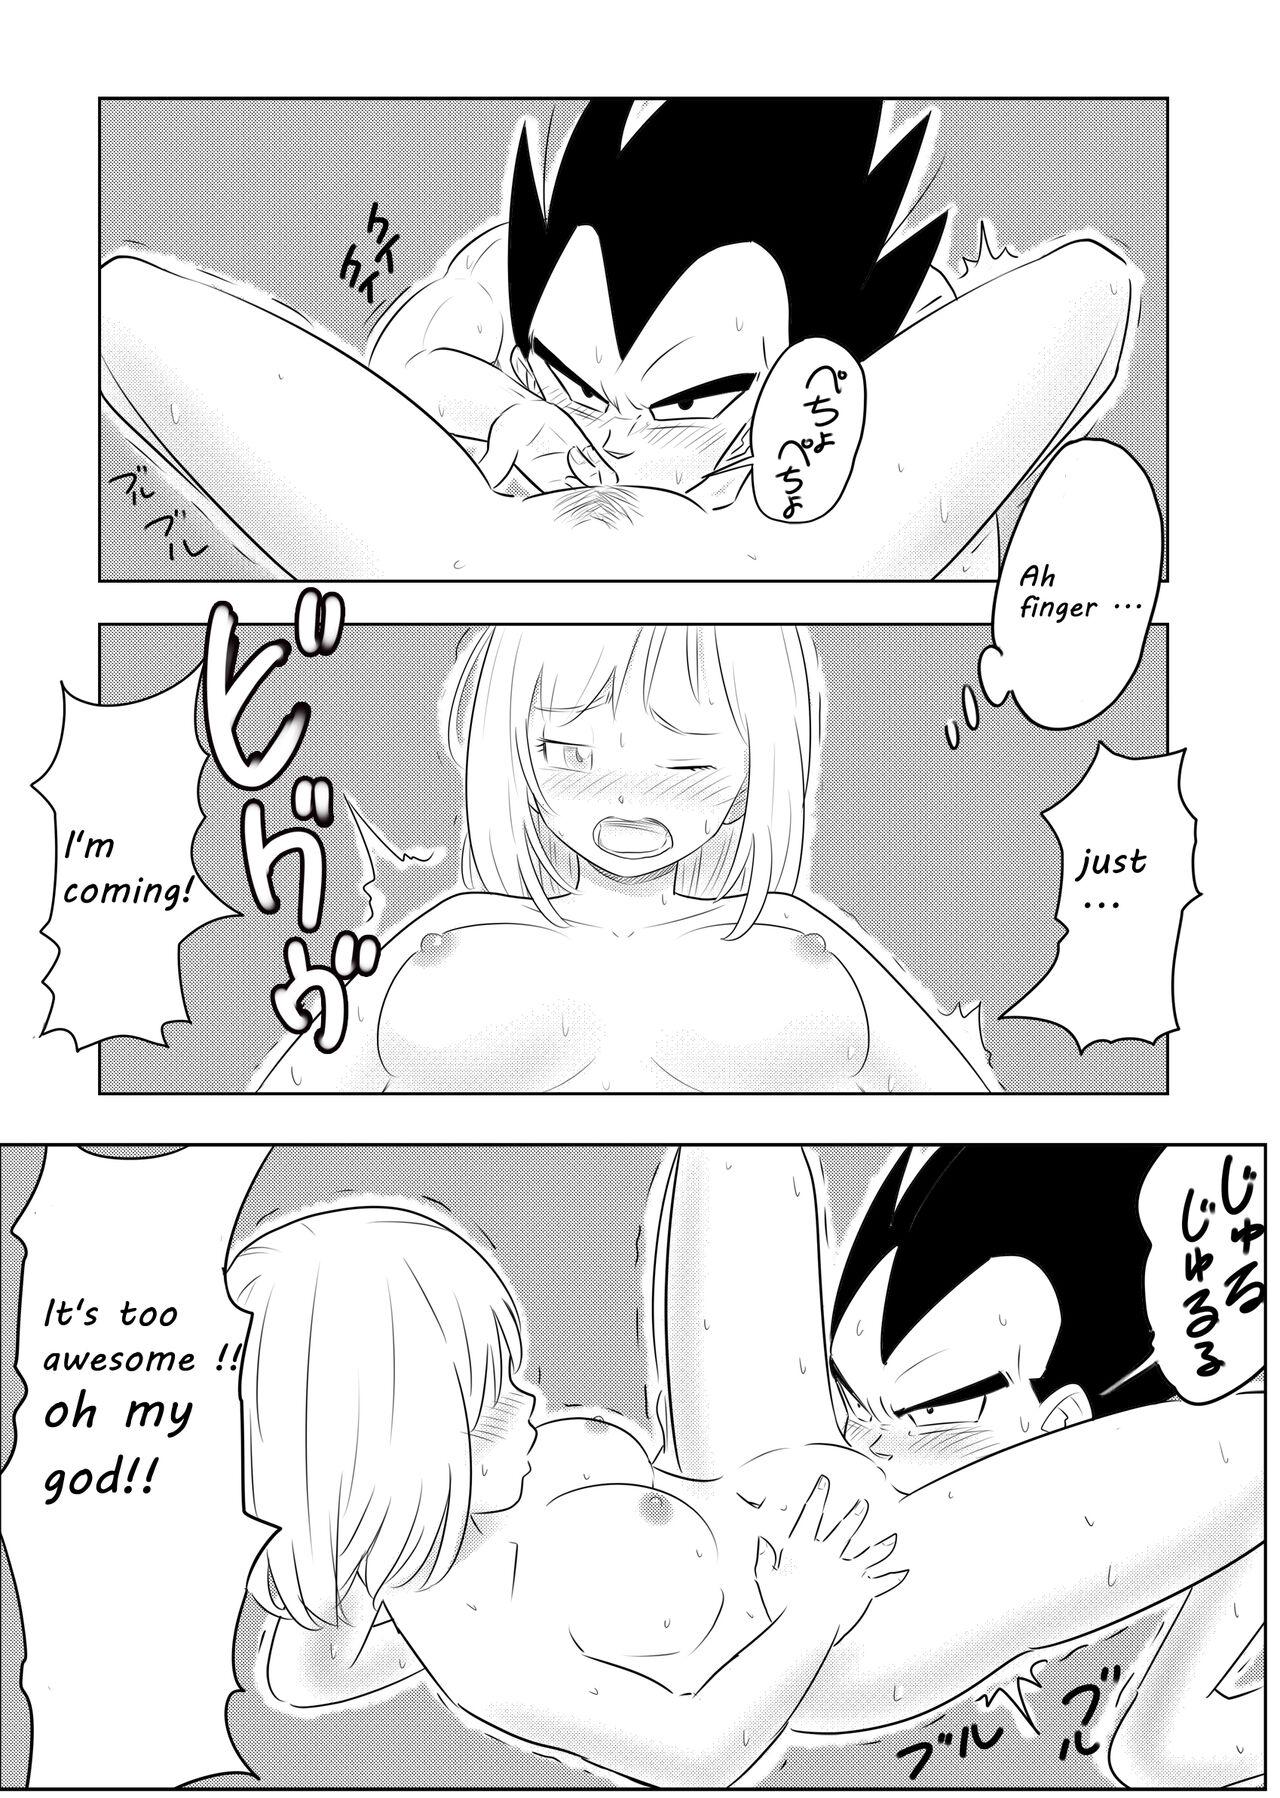 Wet Pussy Night Training - Dragon ball z Huge Tits - Page 10